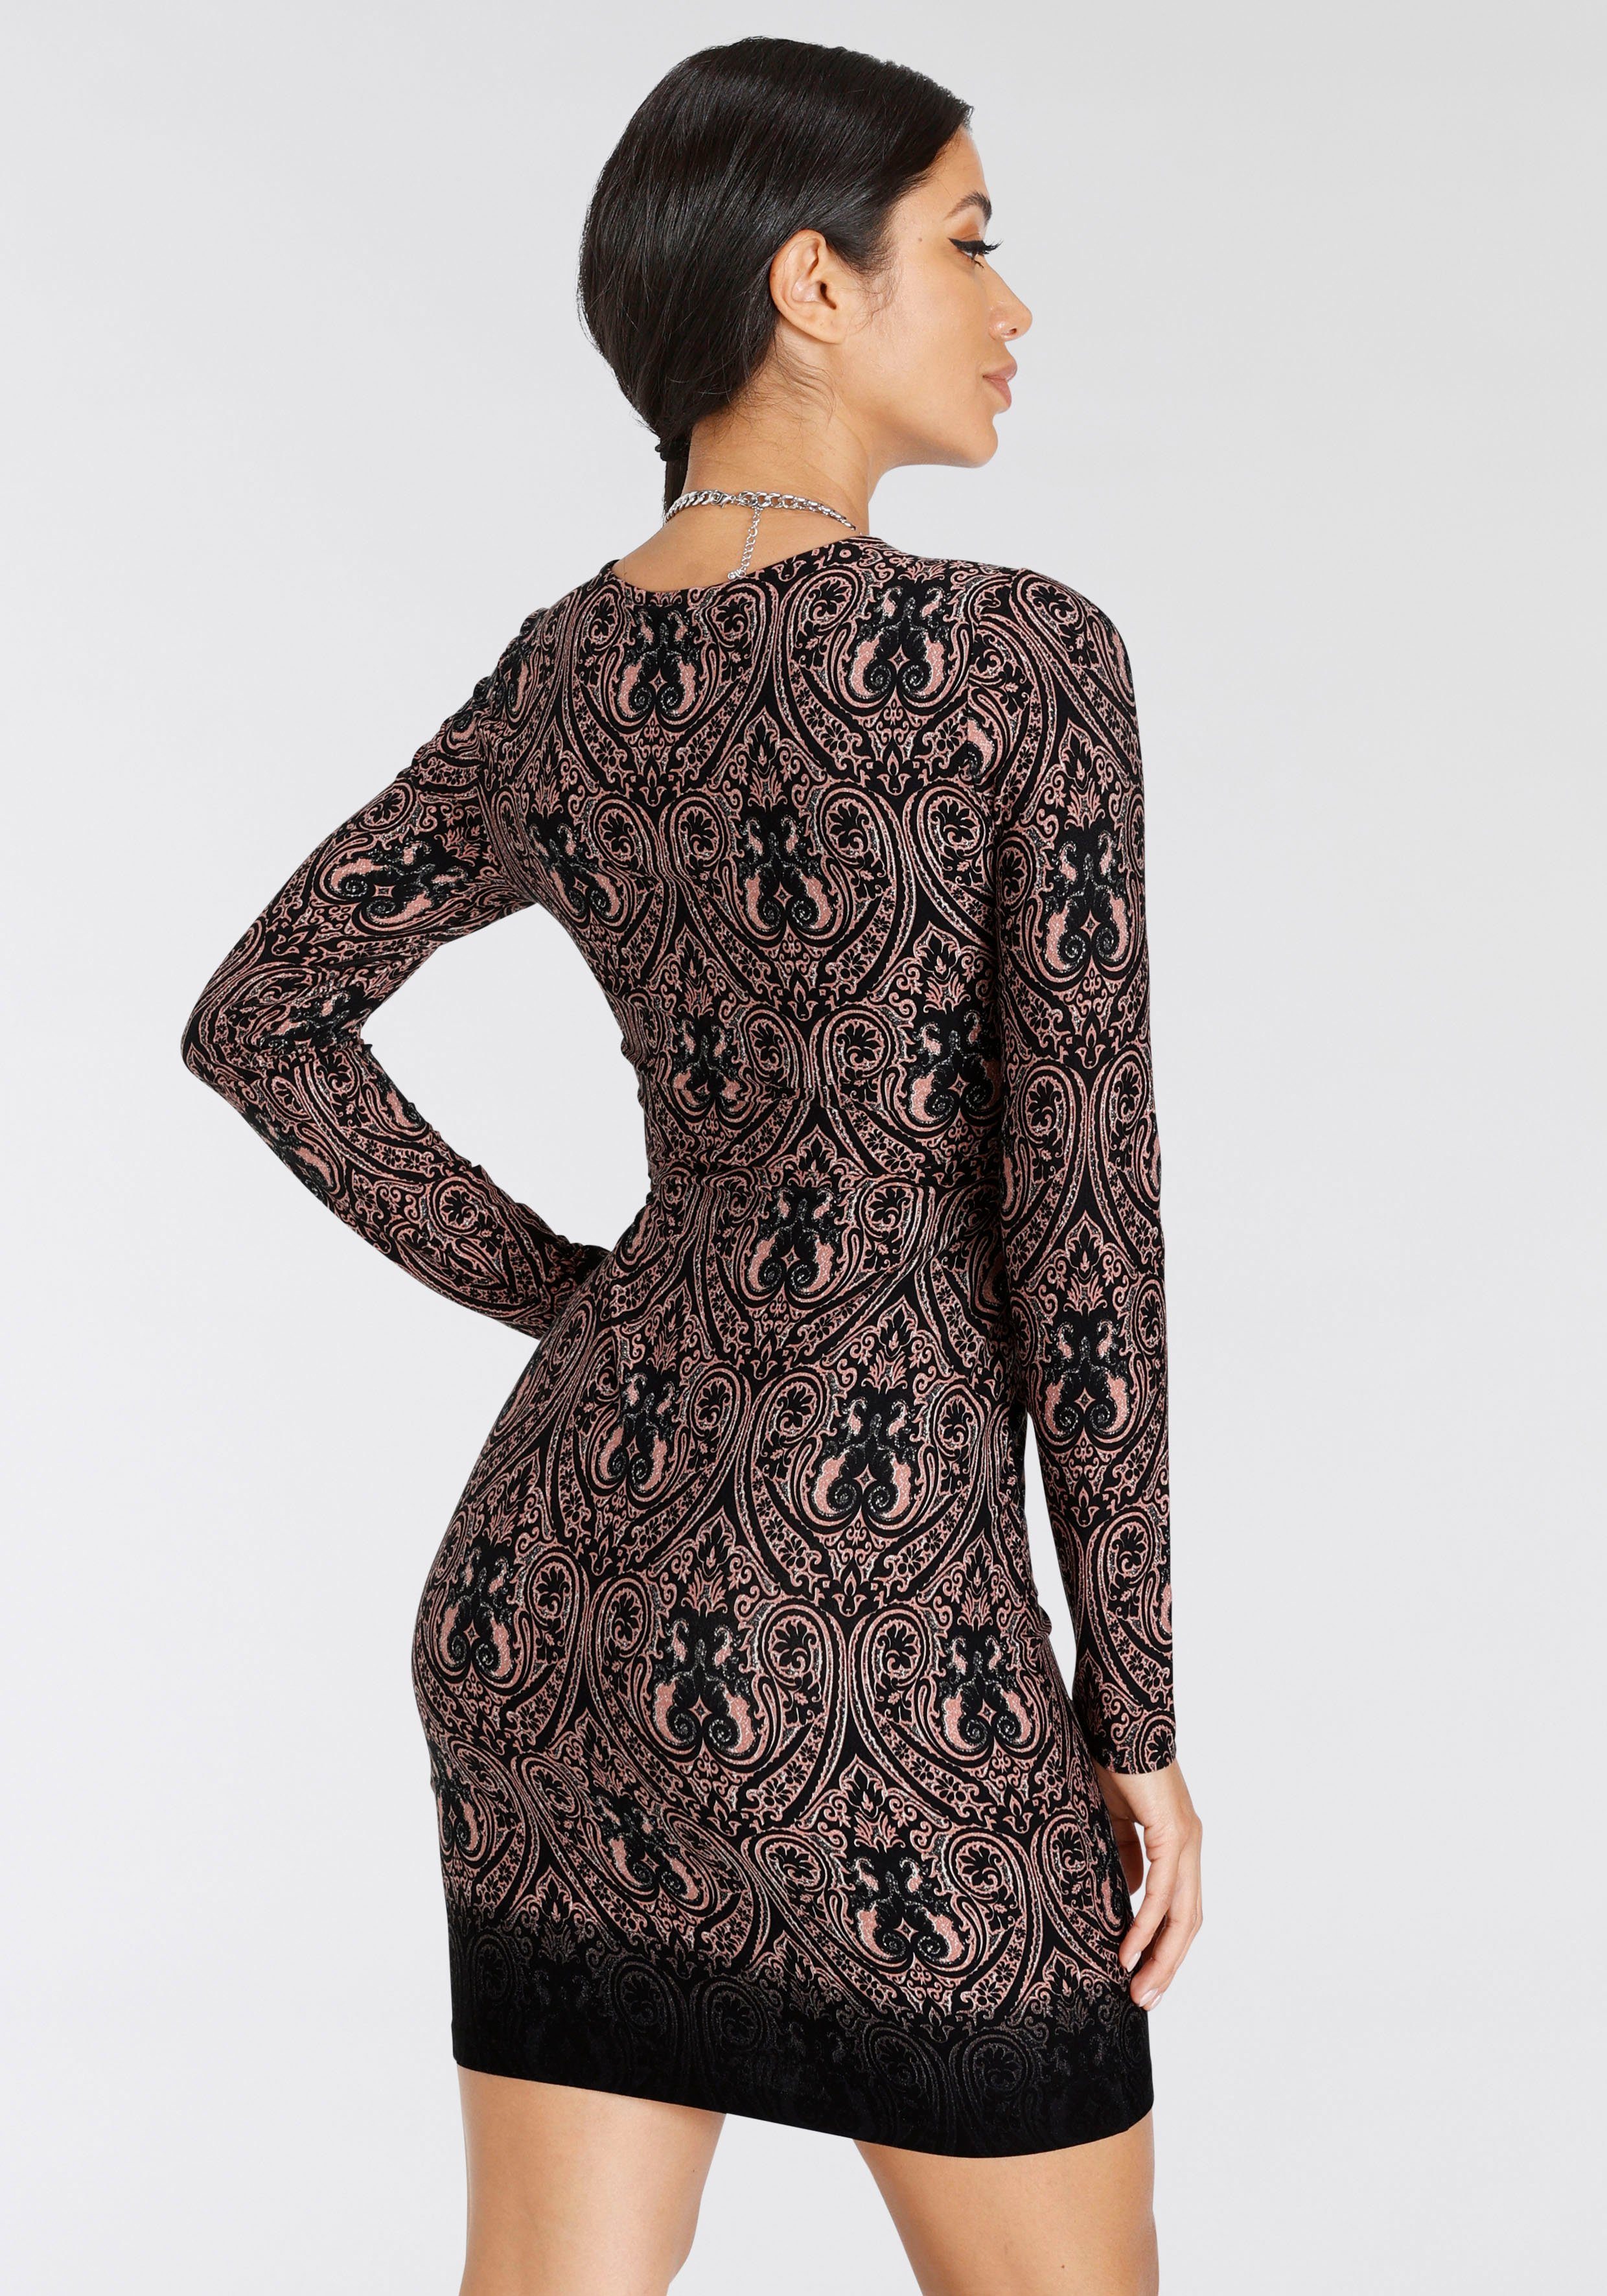 und Paisley-Muster mit Cut-Out Melrose Jerseykleid